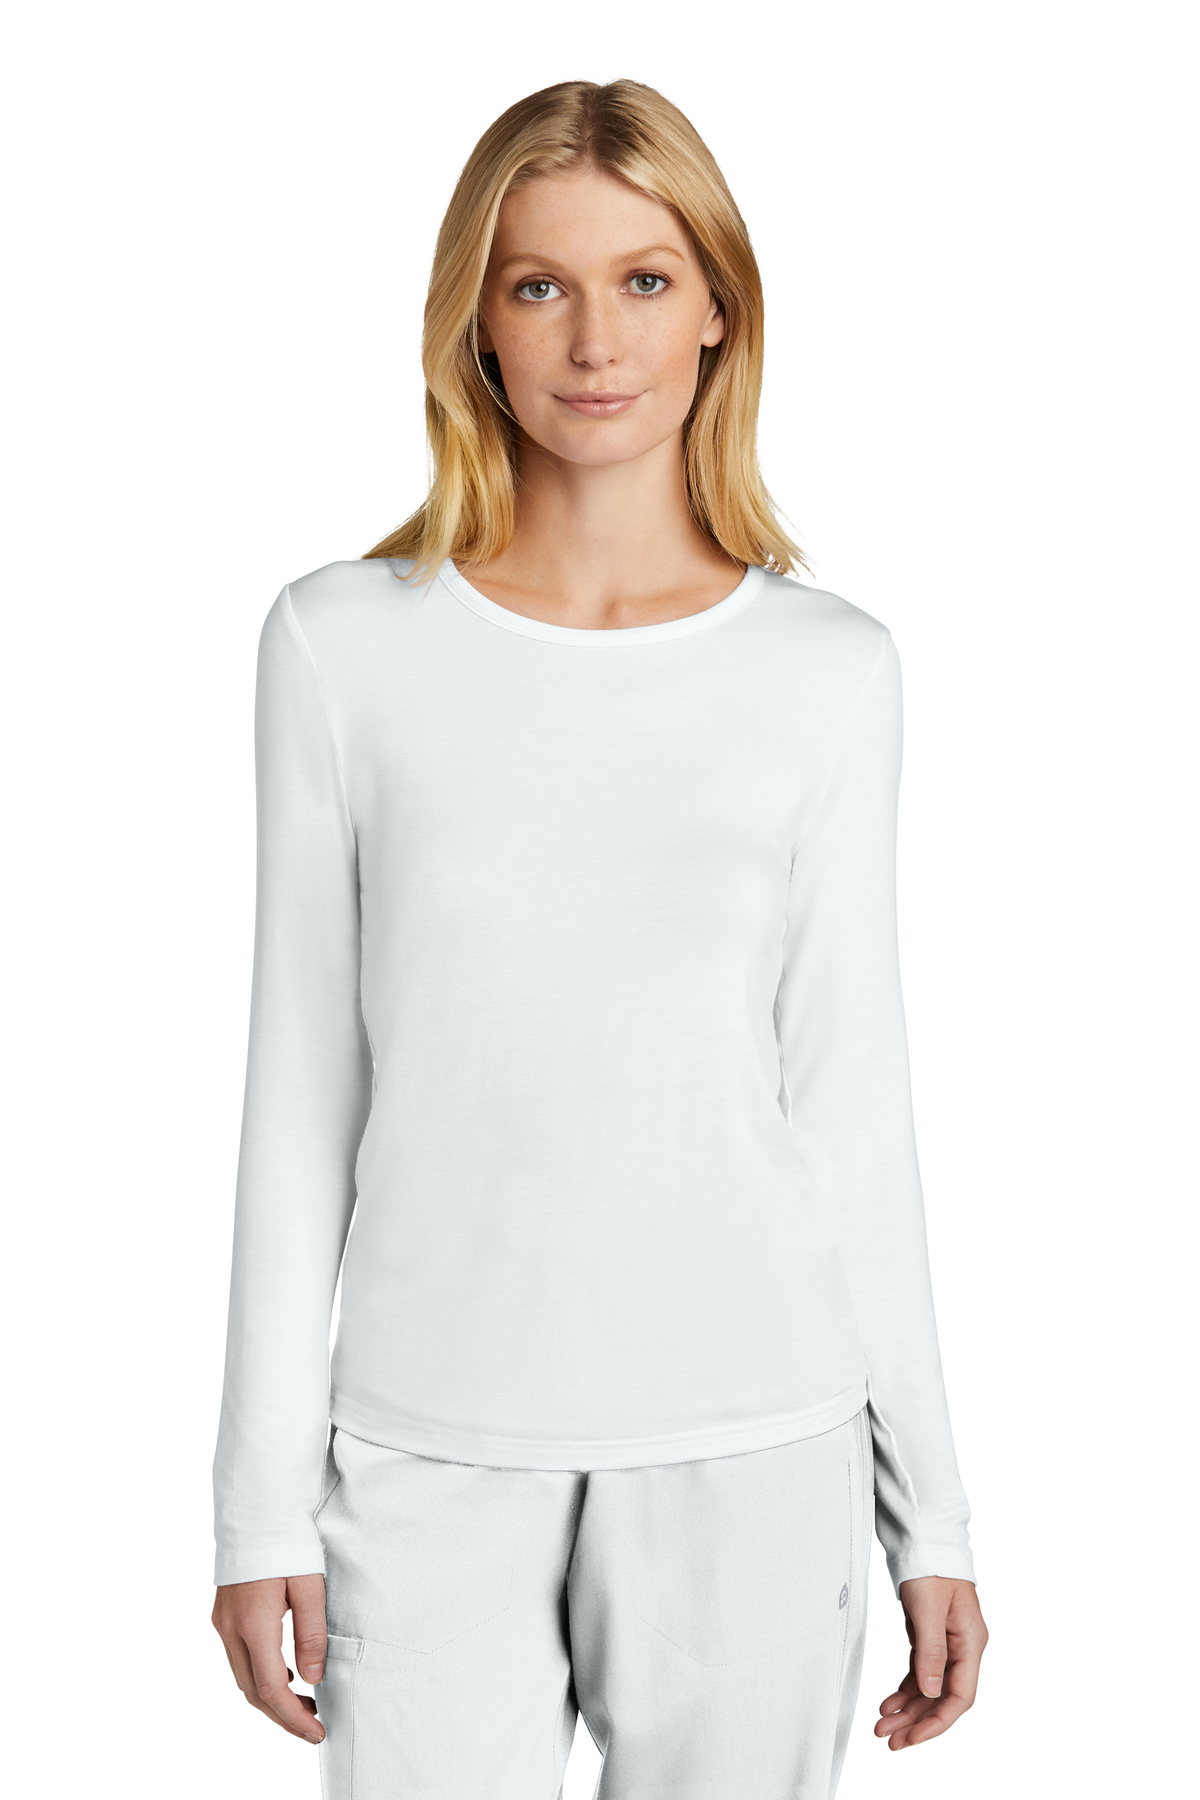 WonderWink Women’s Long Sleeve Layer Tee | Product | Company Casuals